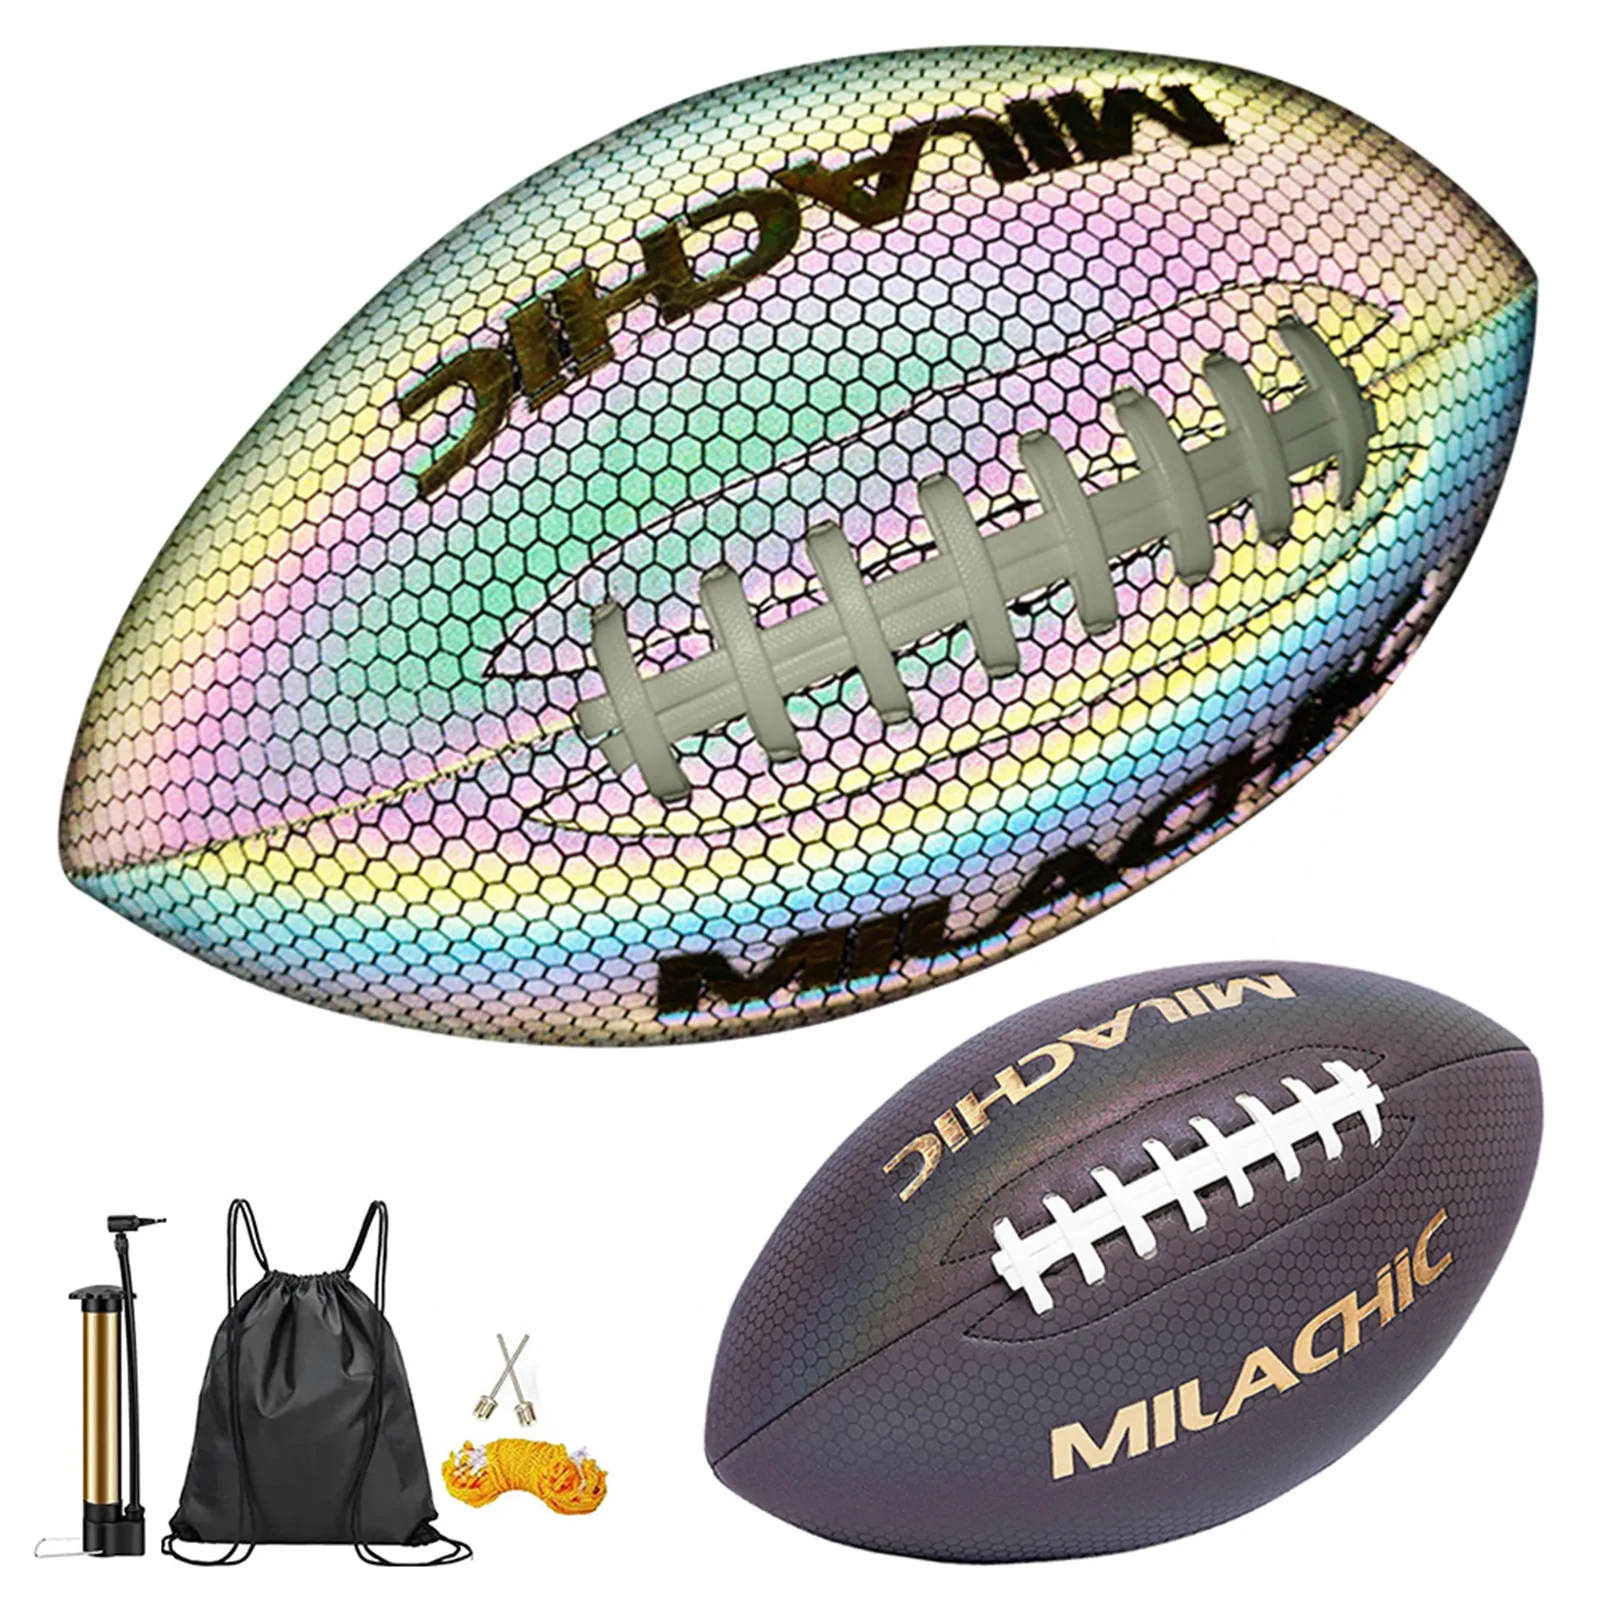 Rugby Holographic Football Light Fluorescent Reflective Standard Game Football Practice Training Ball Team Sports